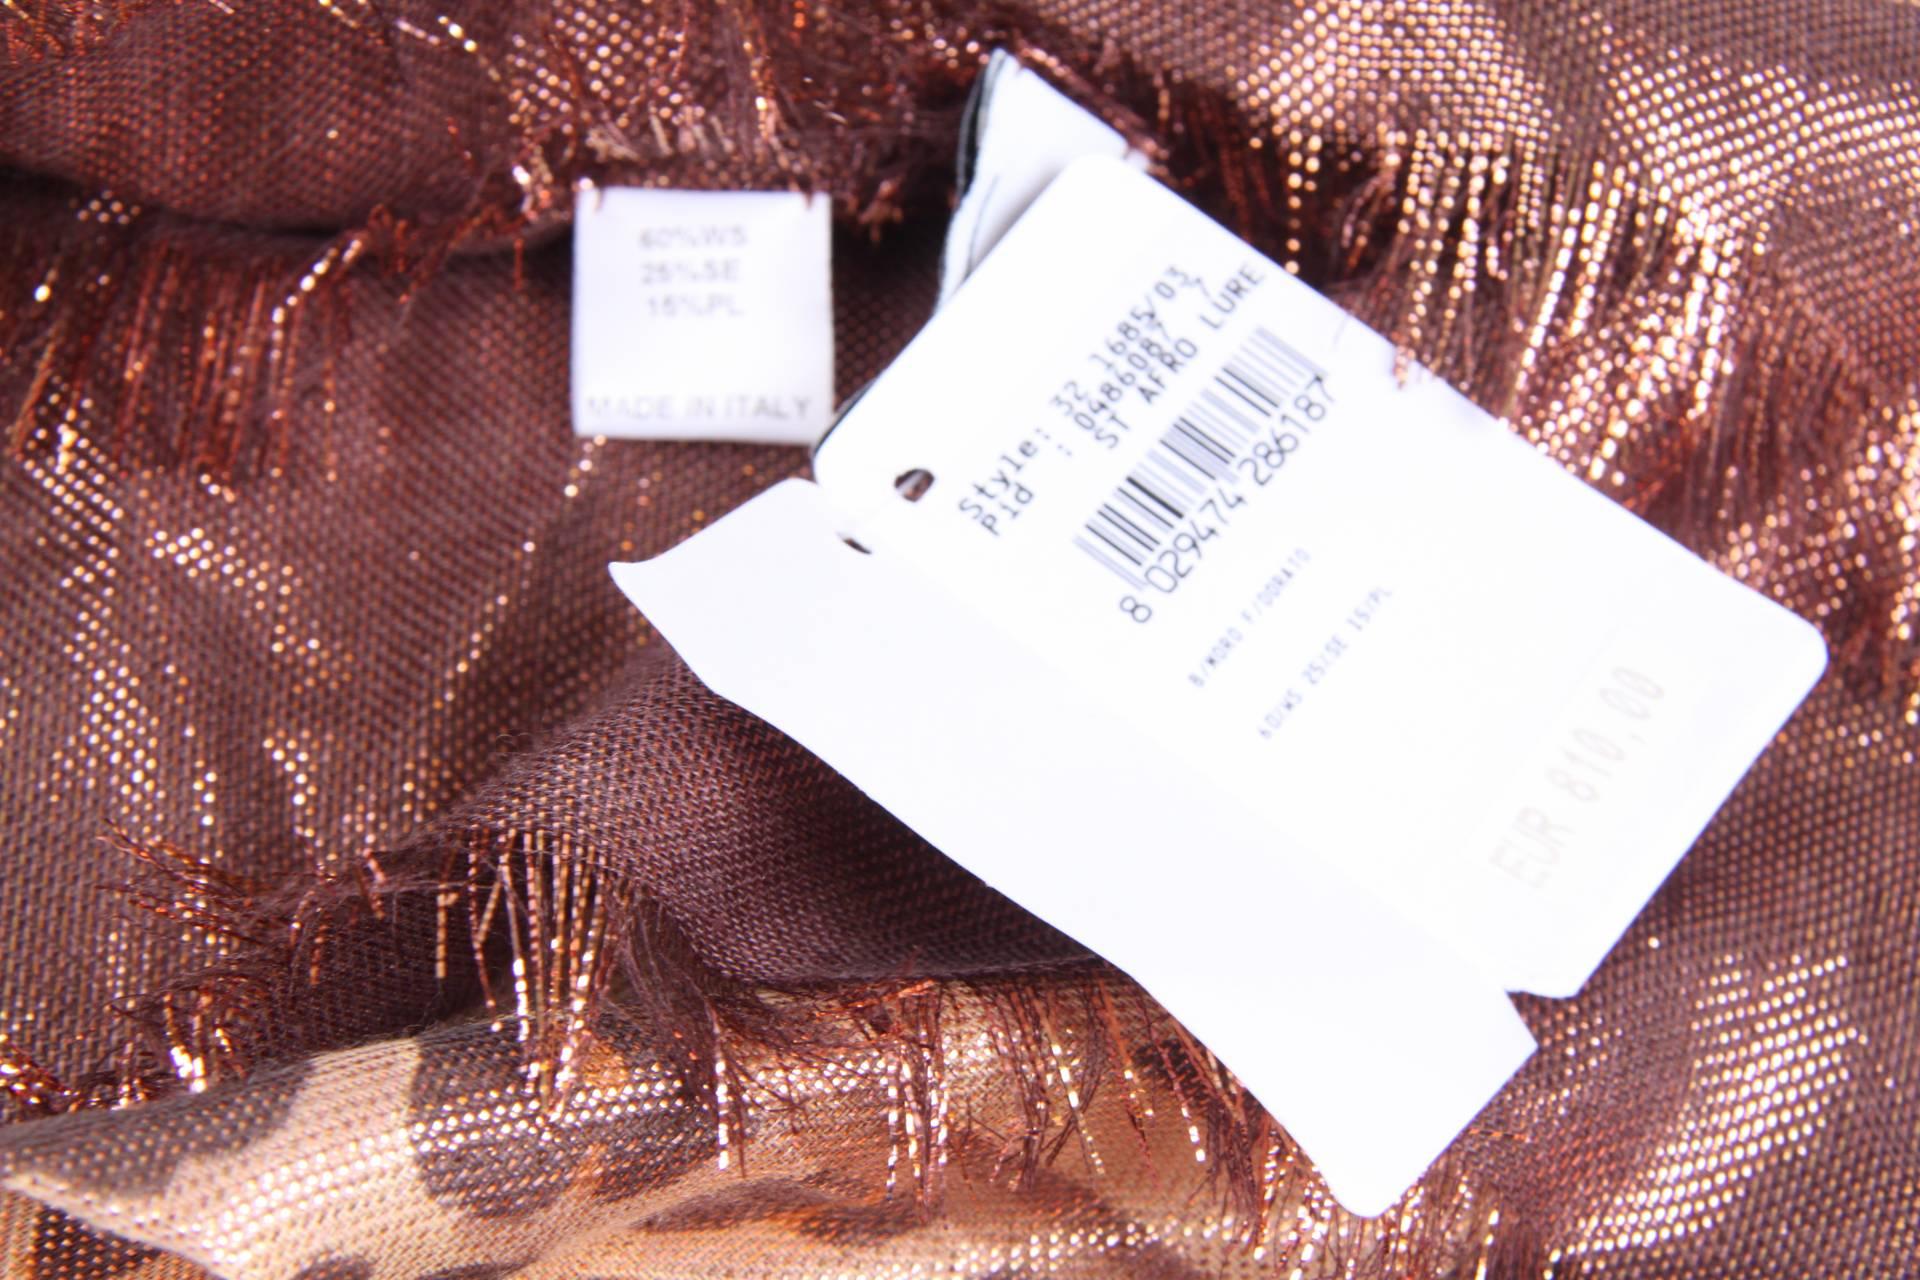 Salvatore Ferragamo scarf with an animal print in brown, dark brown, beige and shiny metallic bronze.  

Material: 60% cashmere, 25% silk, 15% polyester

Measurements: 190 x 140 cm.

Condition: 10/10, new! 

Made in Italy.